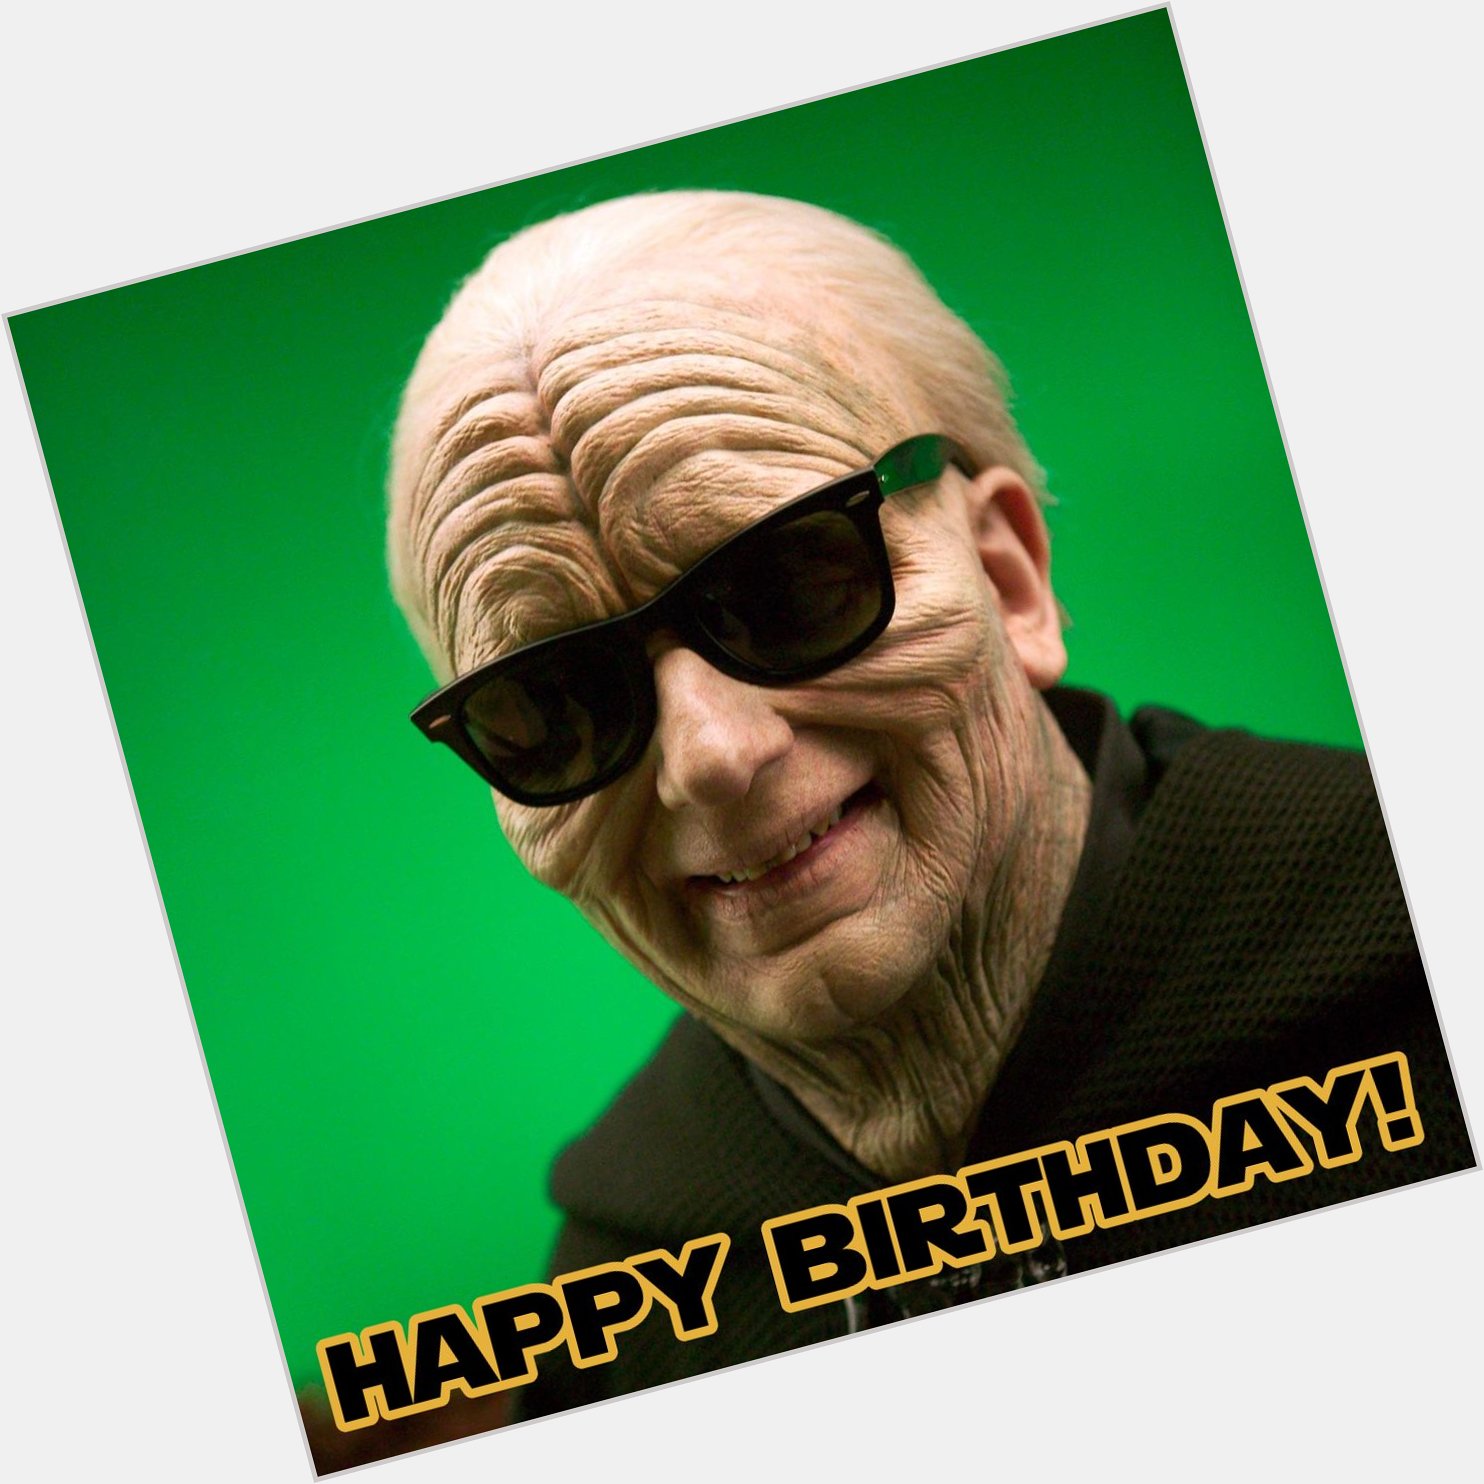 Today we want to send Happy Birthday wishes to the man, the myth, the Sith... Ian McDiarmid! -B- 